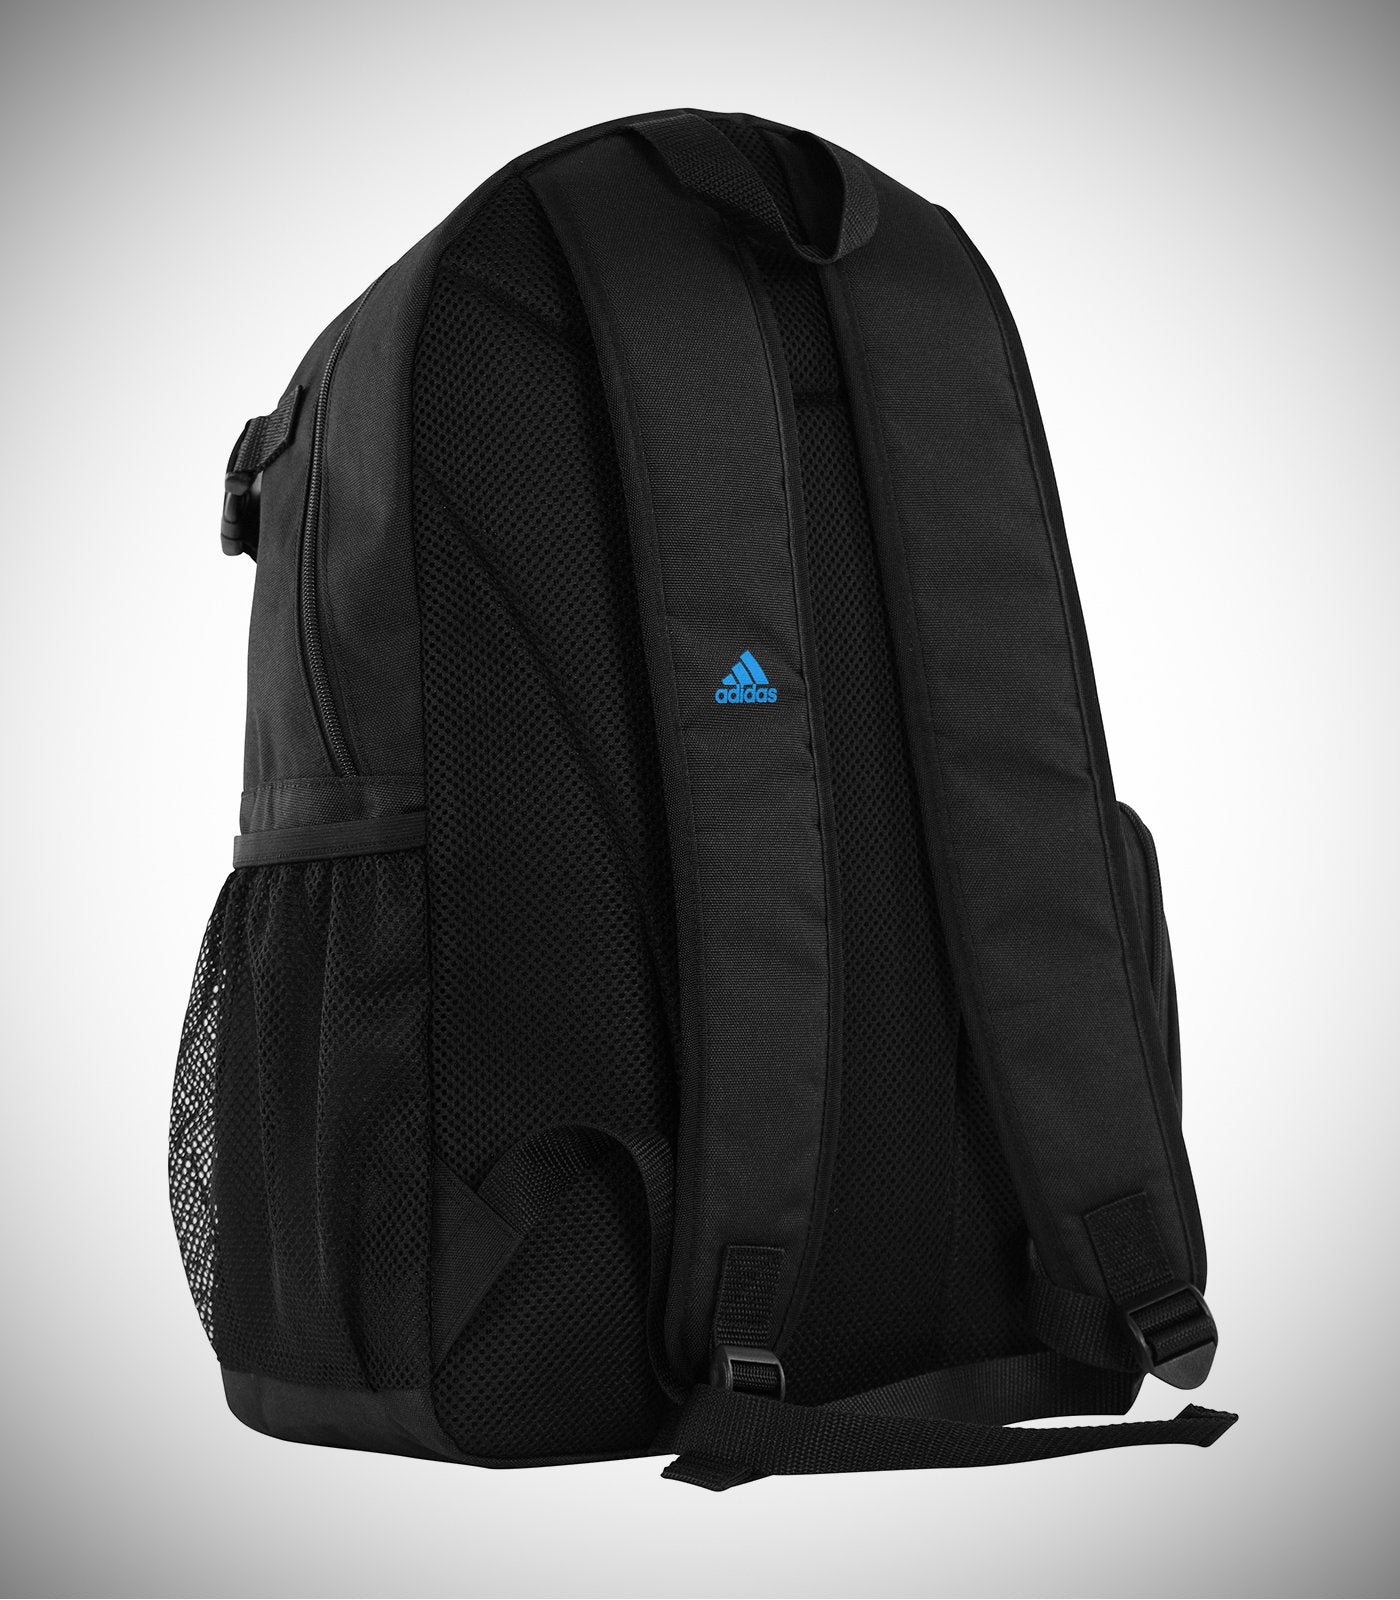 adidas backpack blue and black